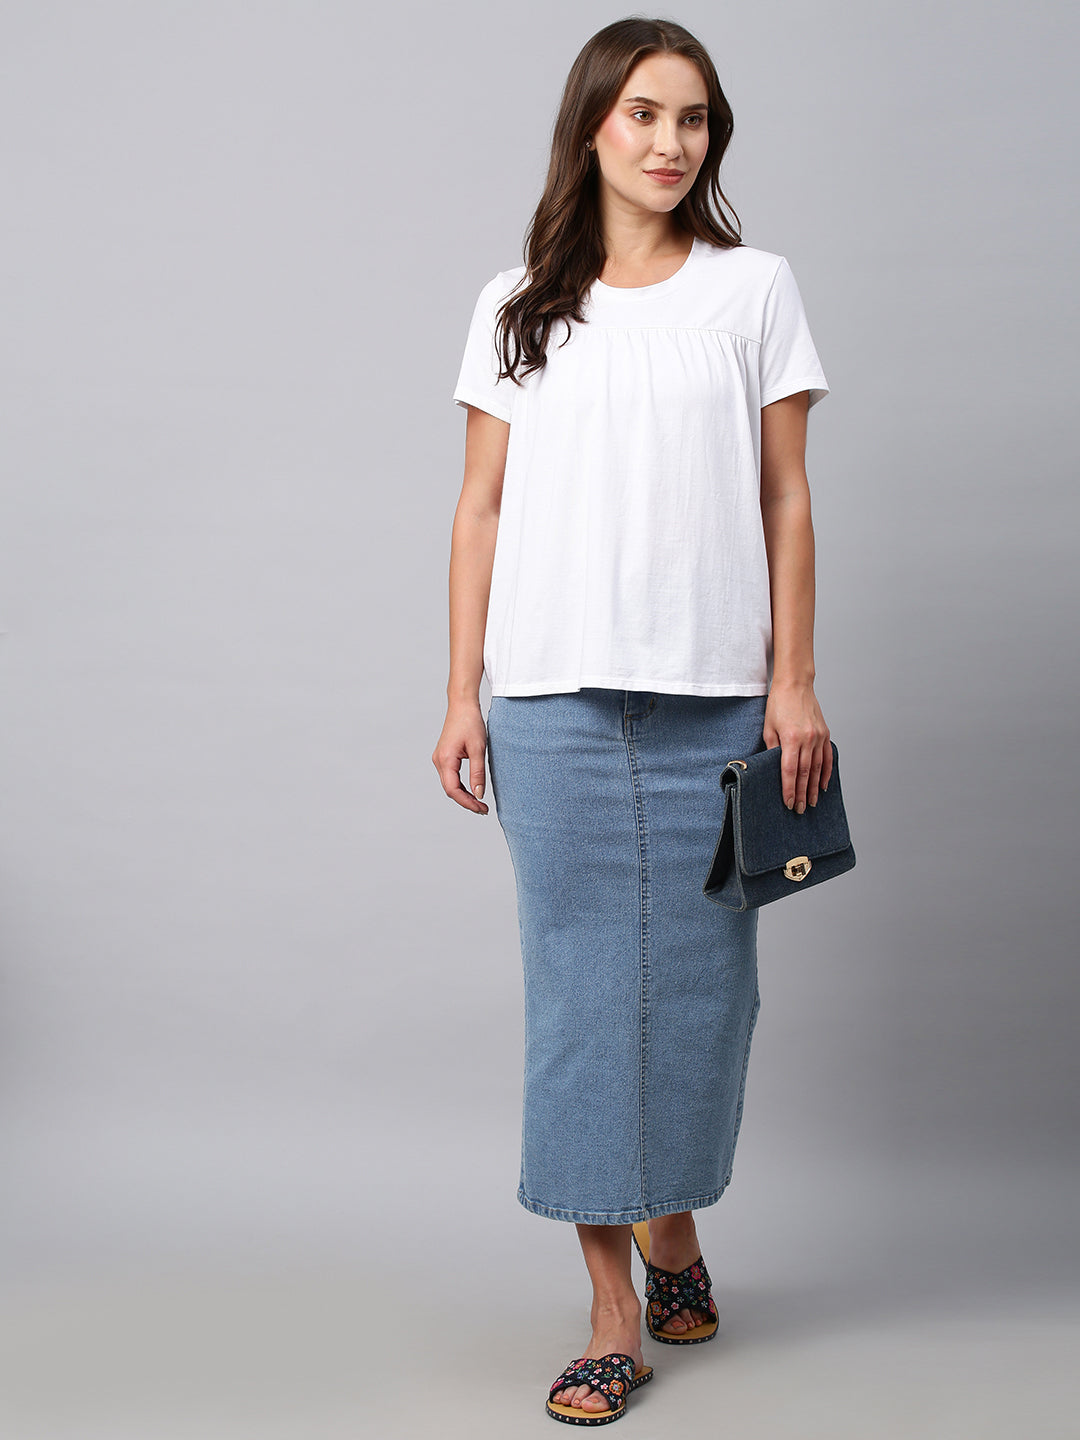 Y2K Denim Skirt With Side Slit, Tassel Trim, And Mini Streetwear Style High  Waist, A Line, And Pleated Design For Women From Strangerry, $27.22 |  DHgate.Com